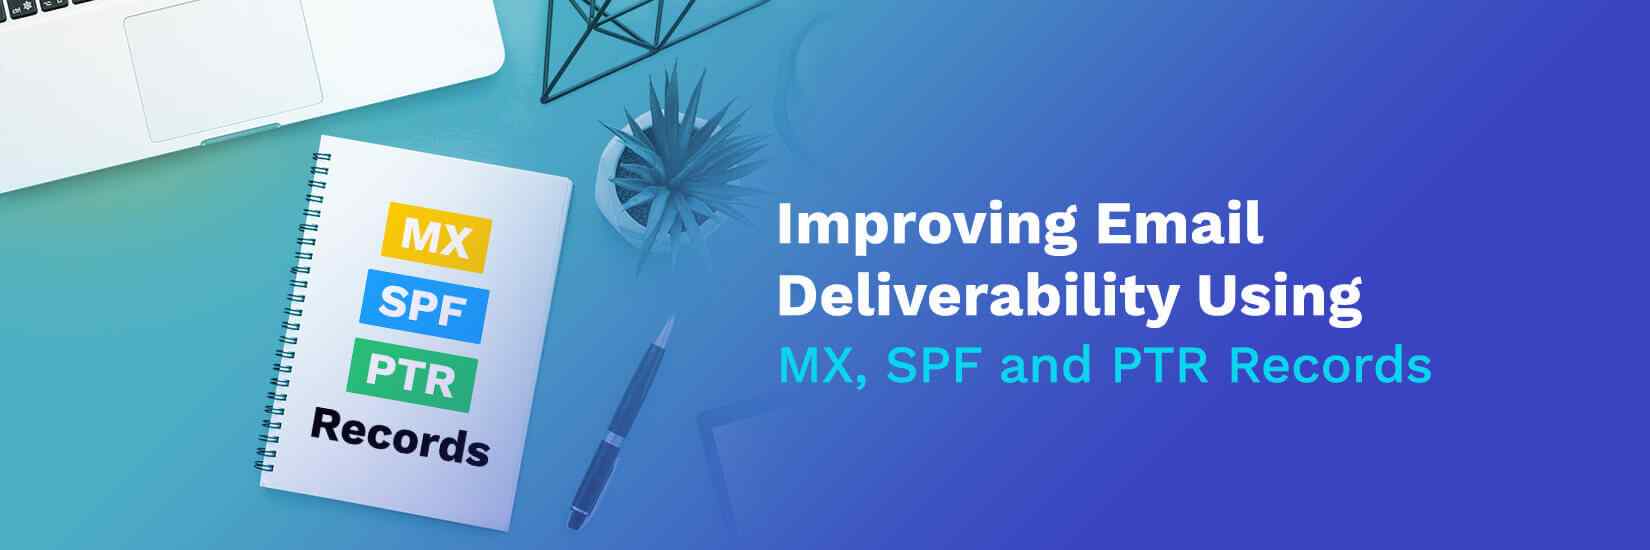 Improving Email Deliverability Using MX, SPF and PTR Records